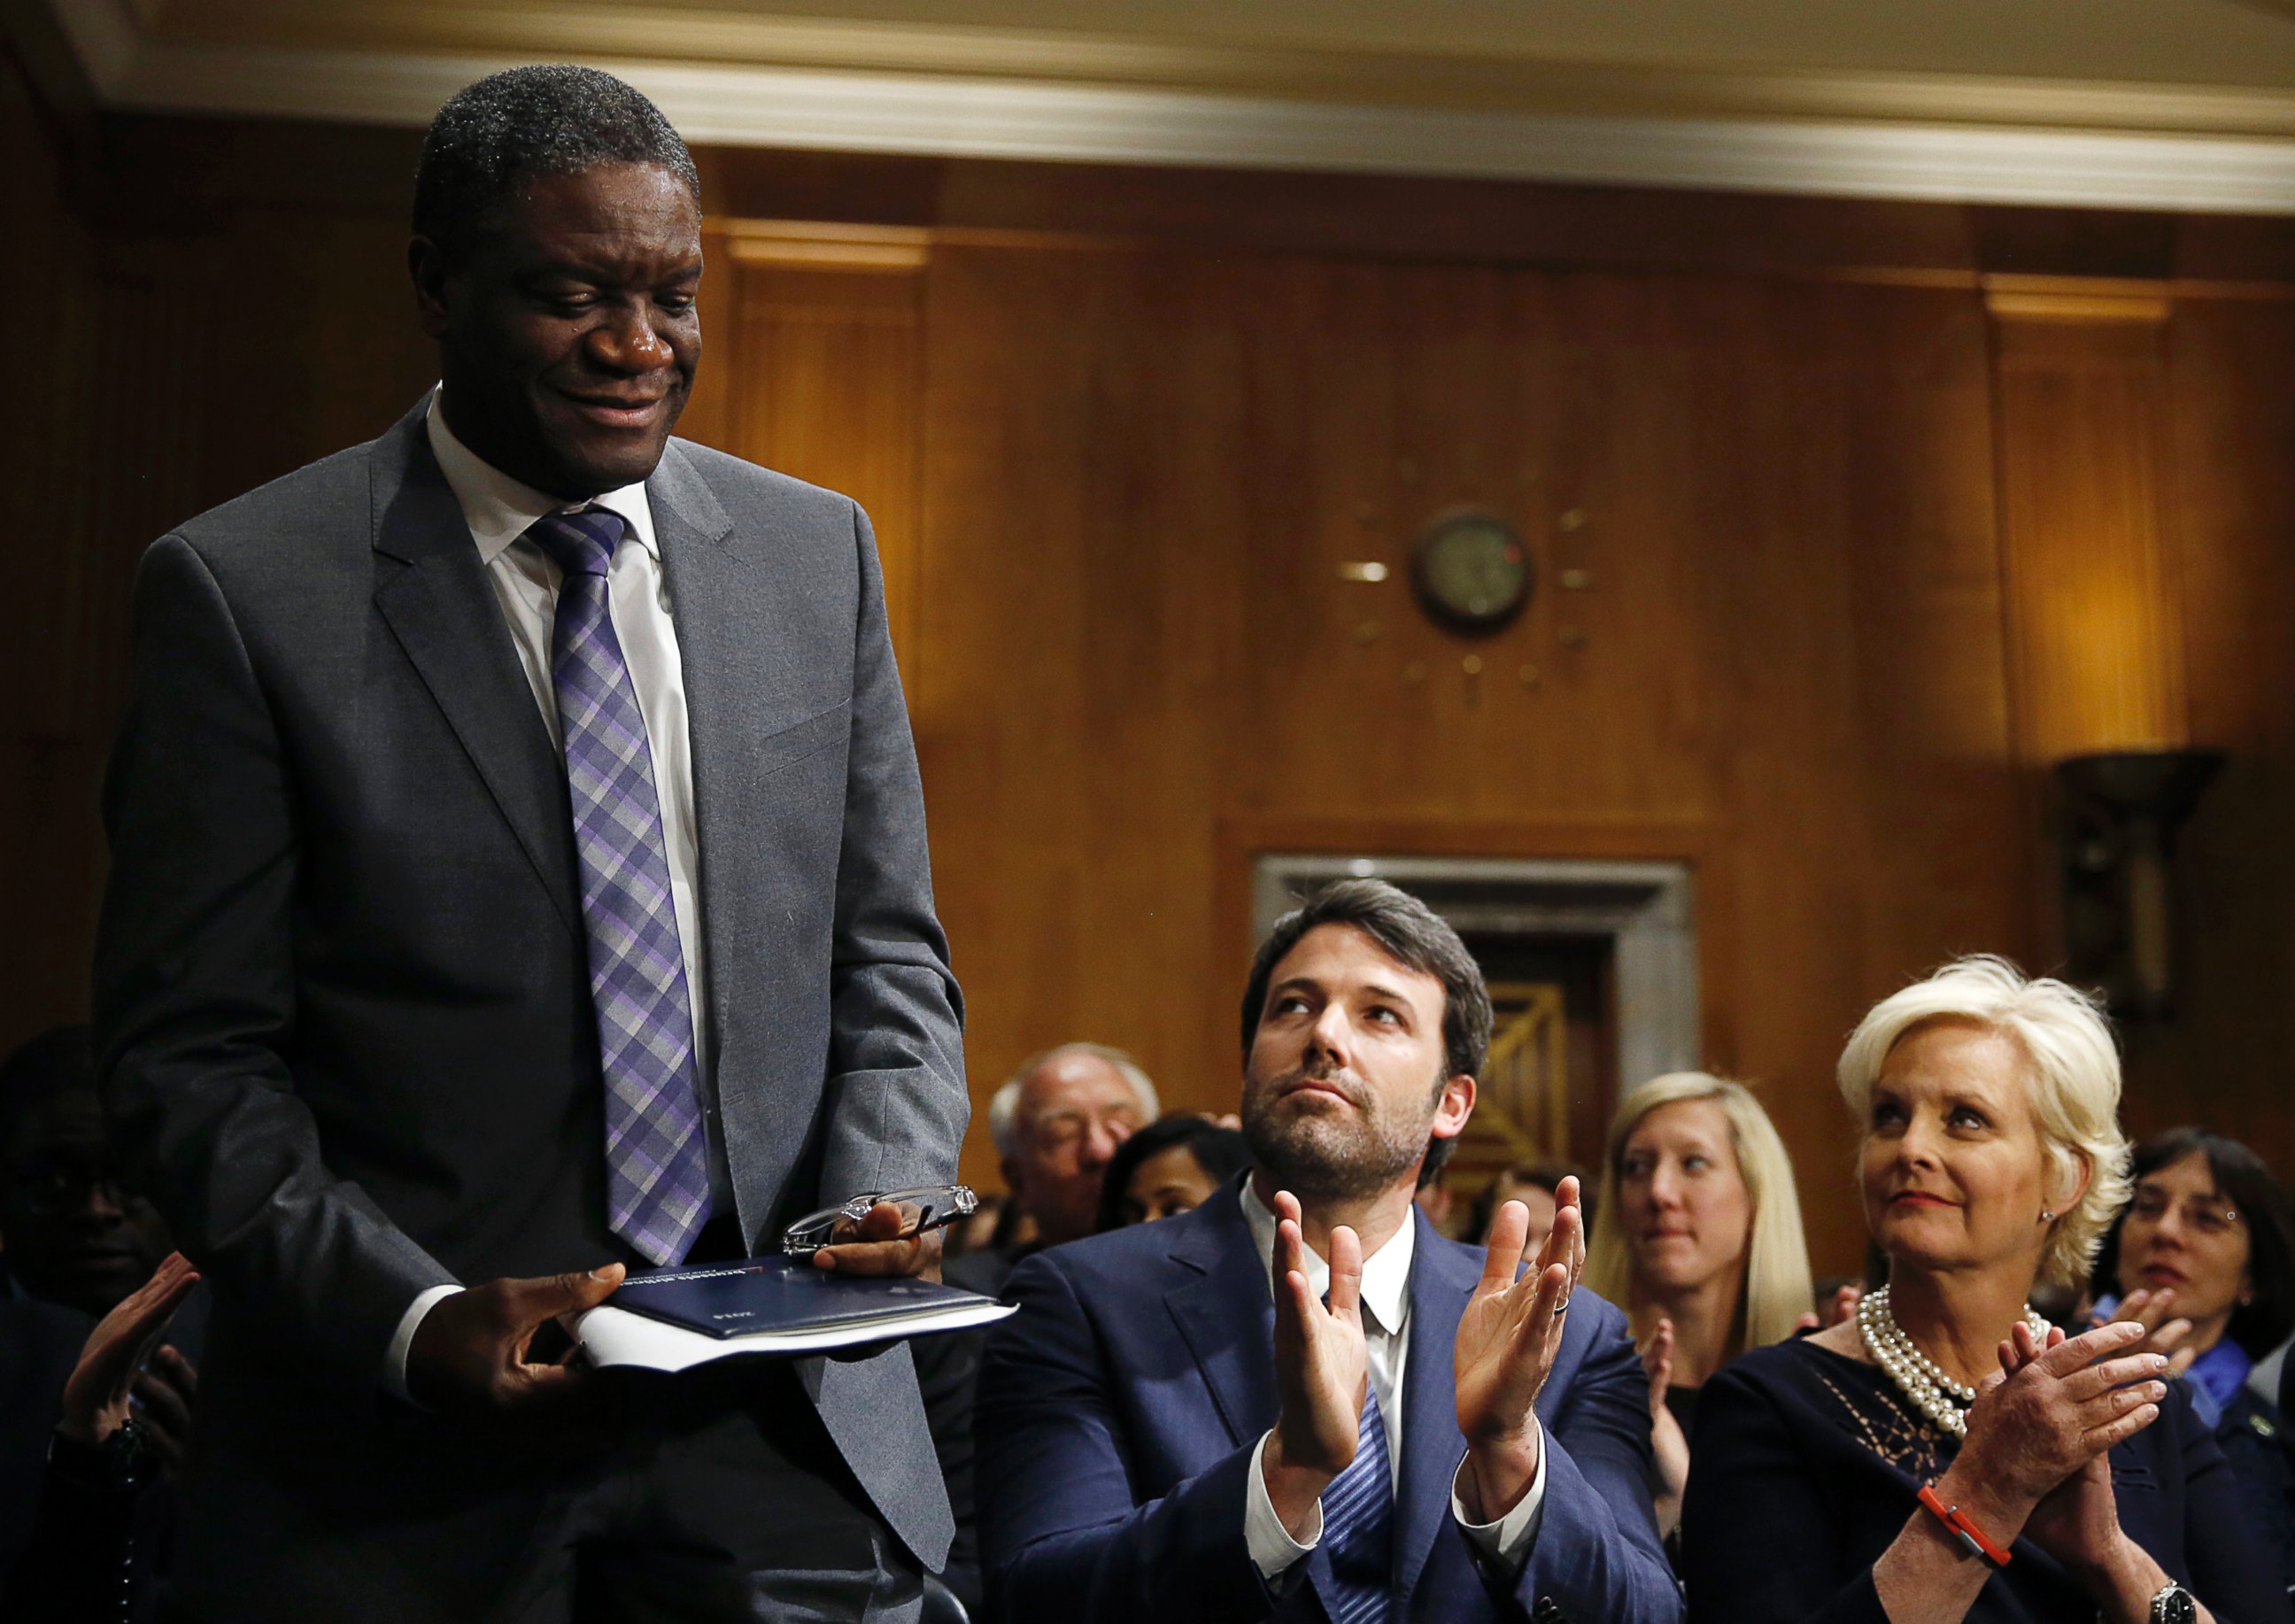 PHOTO: Actor, writer and director Ben Affleck (C) and Cindy McCain (L), applaud Denis Mukwege, (L), Medical Director of the Panzi Hospital in the Congo, at the Senate Foreign Relations Committee on Capitol Hill in Washington Feb. 26, 2014.